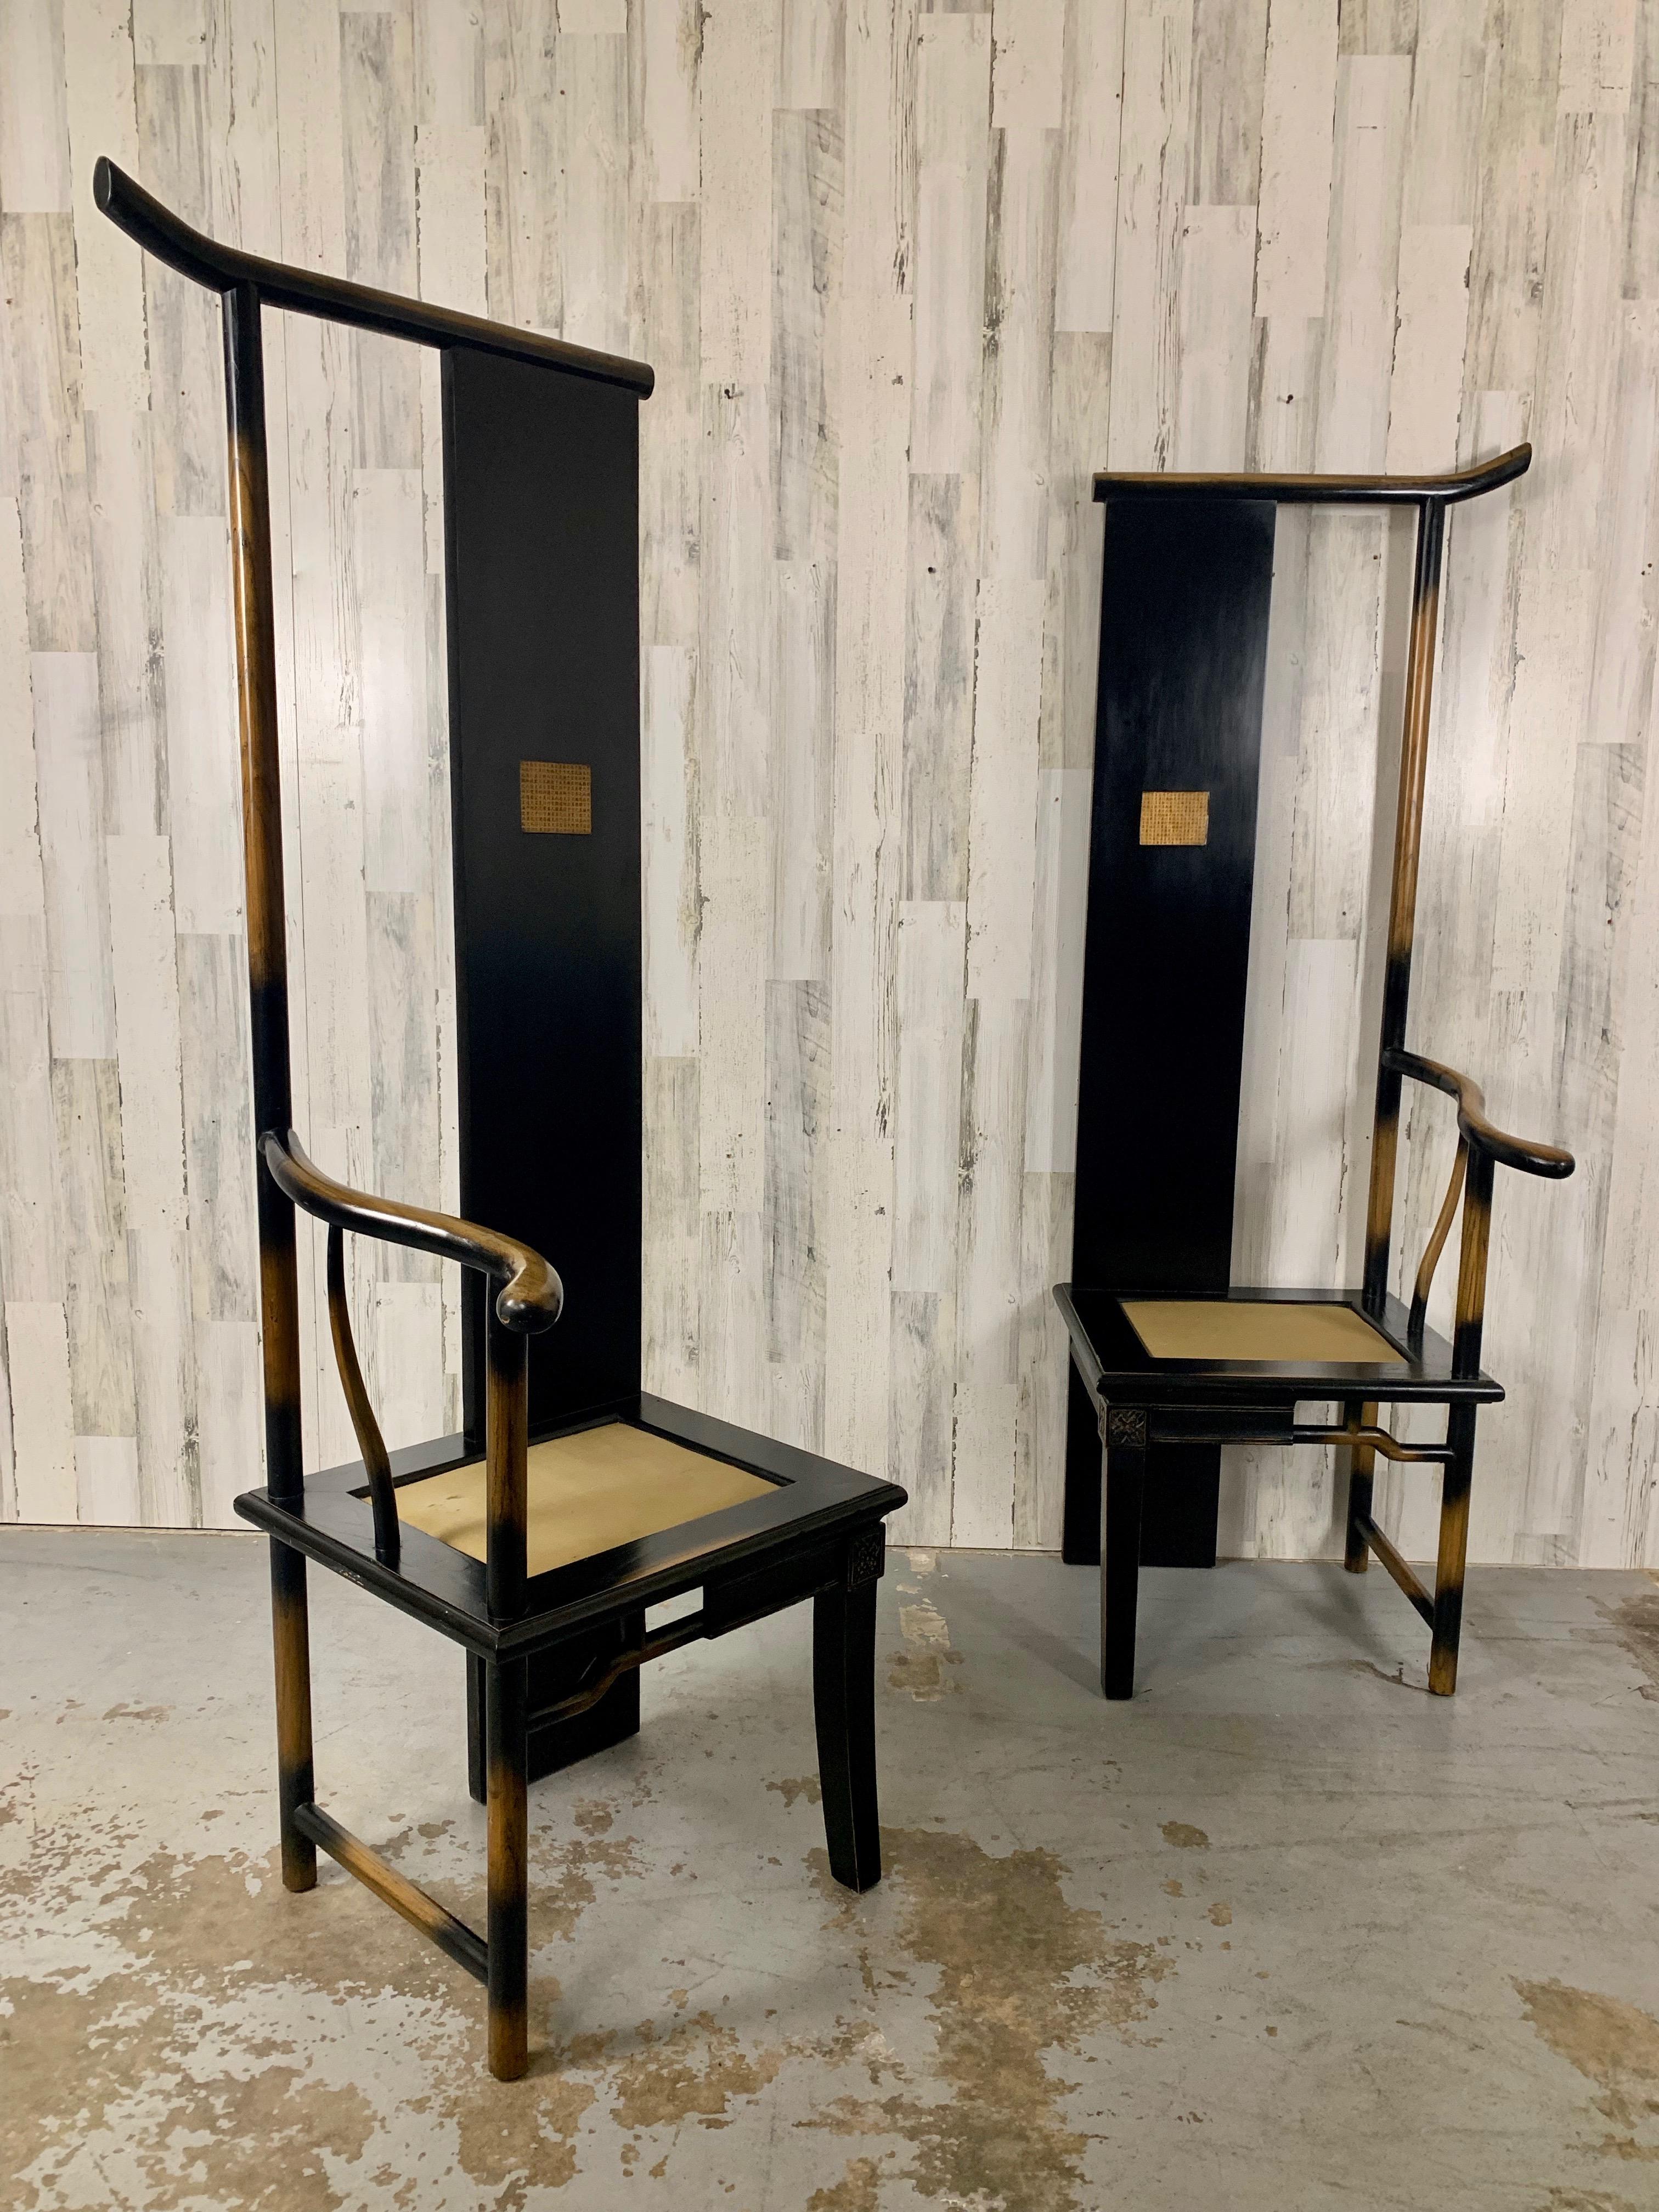  Combined two single arm chairs executed in 1996 by Shao Fan. Made of catalpa and elmwood. He has designed furniture which represents art rather than being purely functional. Each chair he designed stands as an individual work of